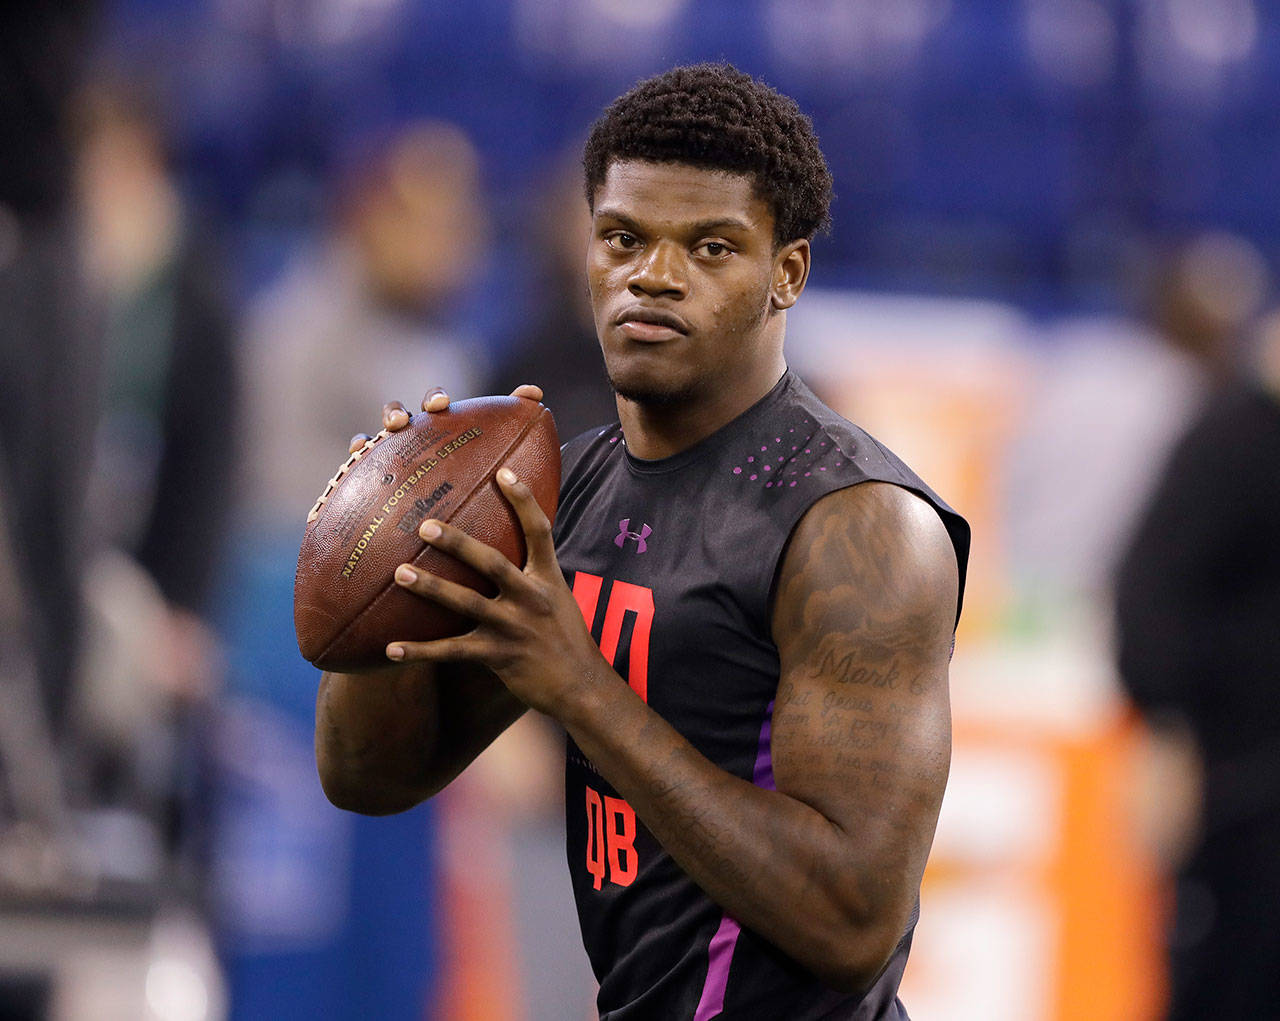 Louisville quarterback Lamar Jackson throws during a drill at the NFL scouting combine March 3 in Indianapolis. (AP Photo/Darron Cummings)